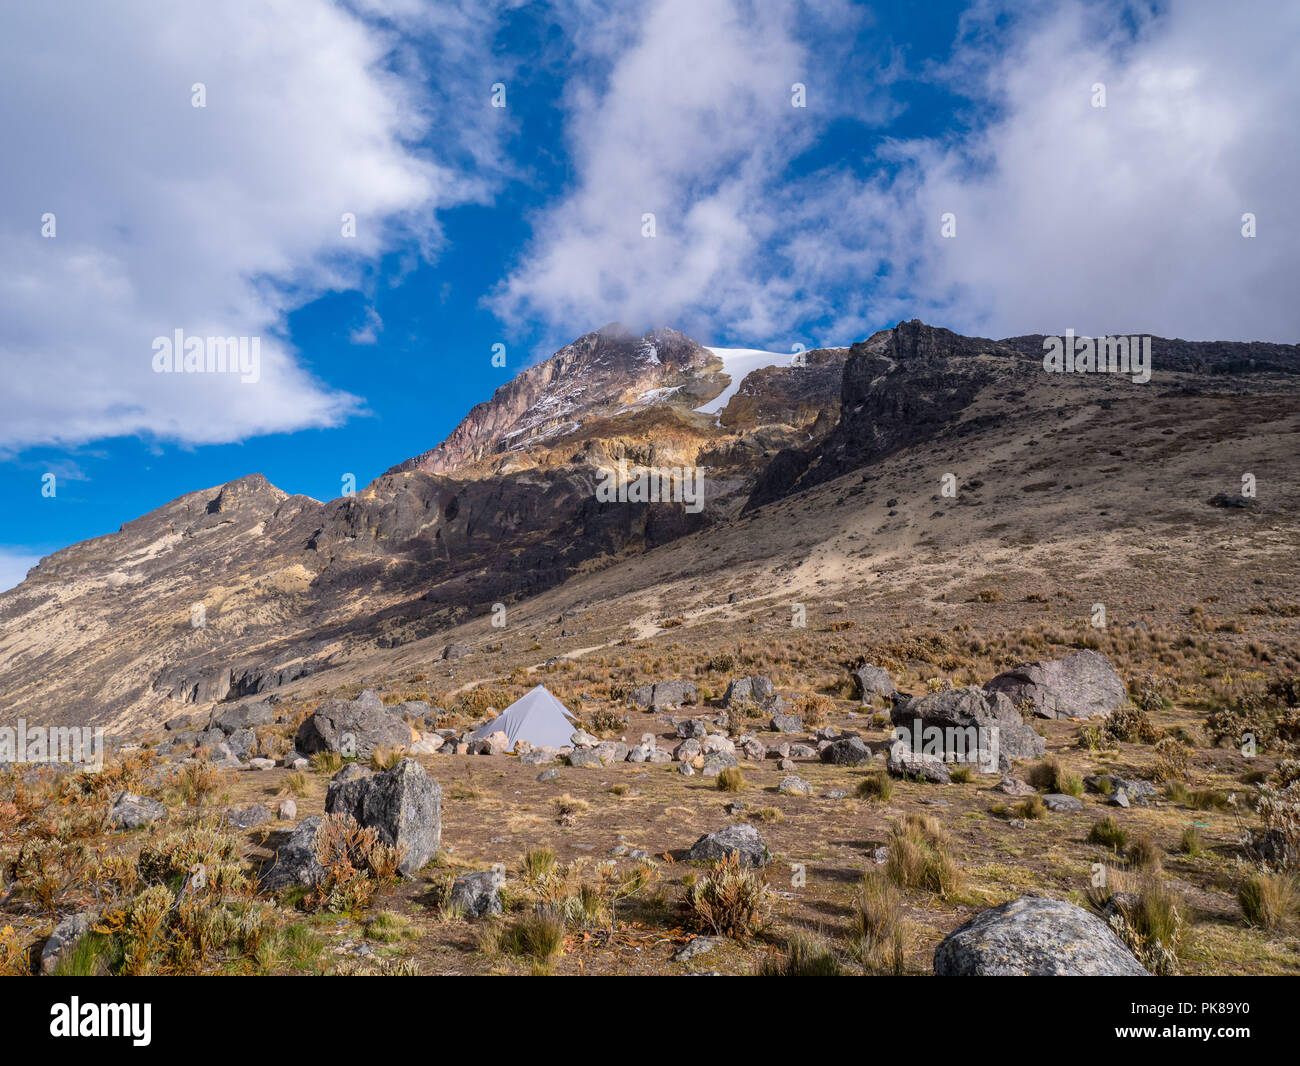 Trekking trip to summit of Nevado del Tolima Los Nevados National Park, basecamp, Colombia Stock Photo